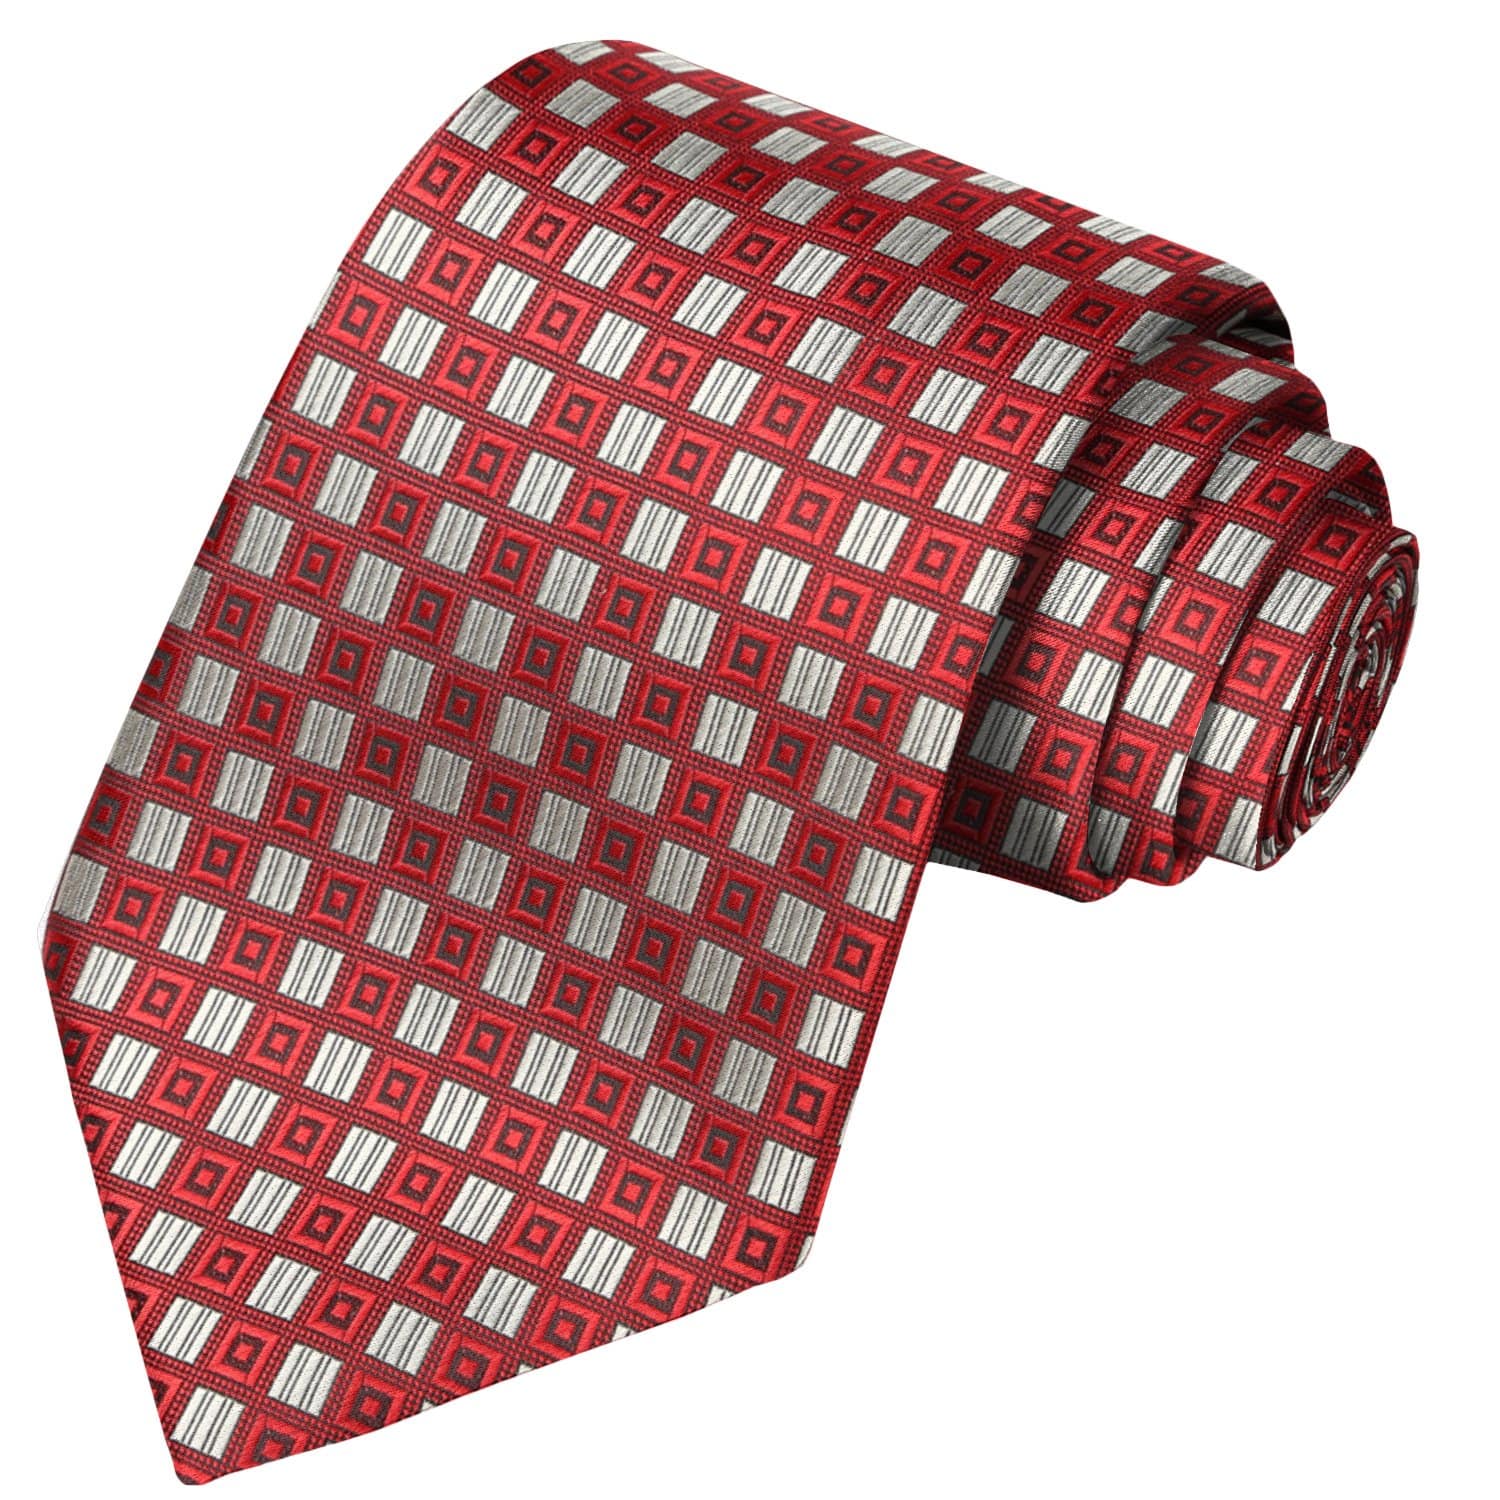 Rose Dotted Squares-Striped Whites Checkered Tie - Tie, bowtie, pocket square  | Kissties